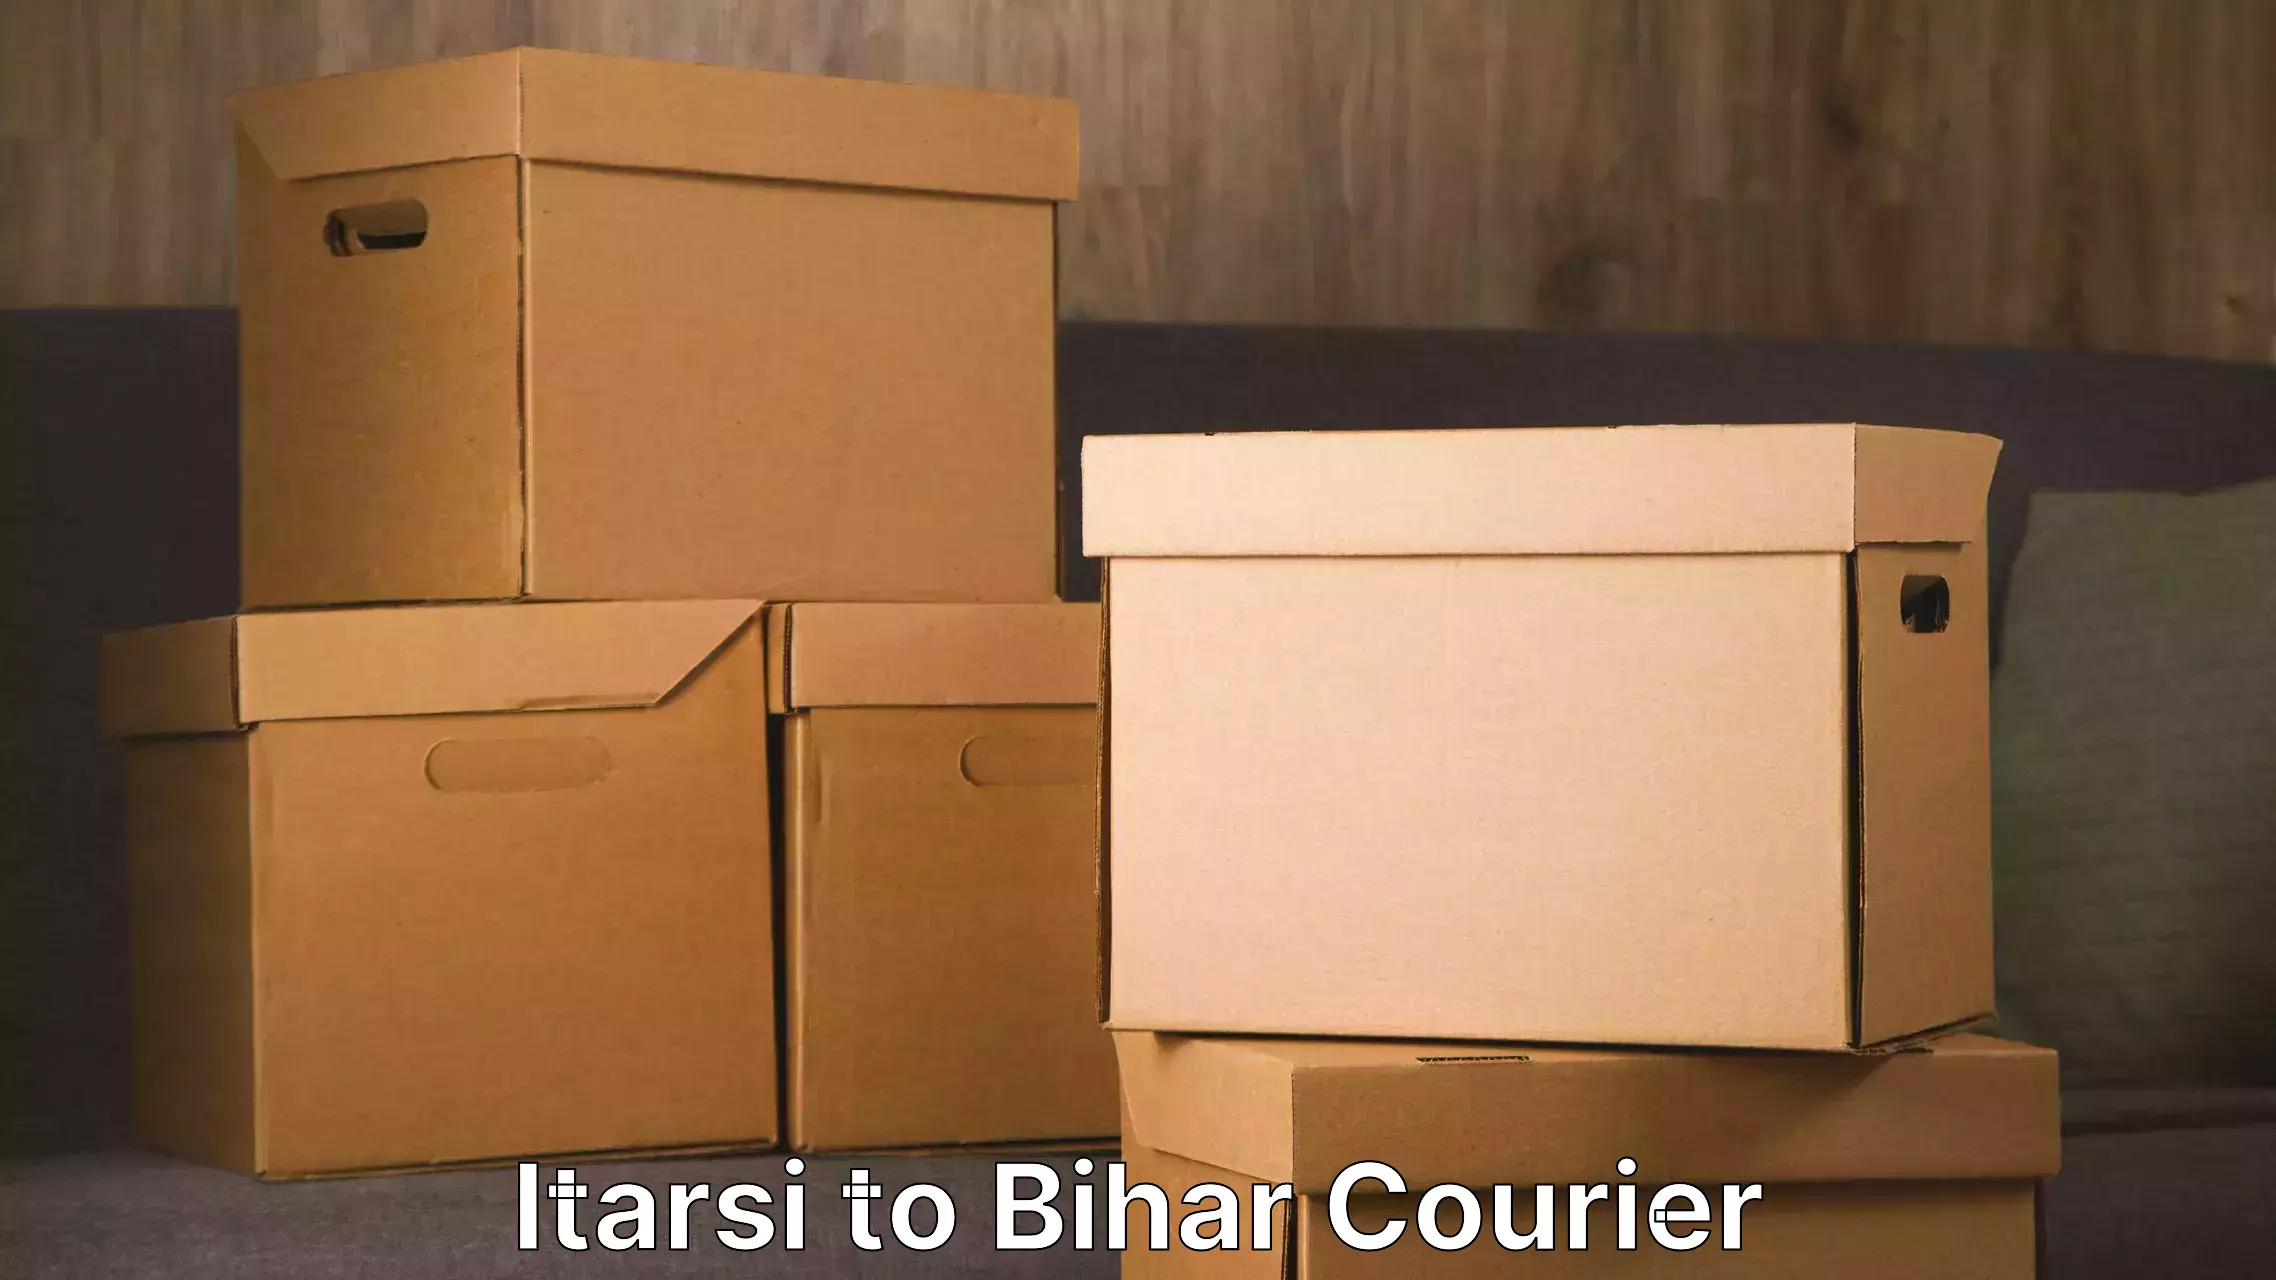 Hassle-free relocation Itarsi to Makhdumpur